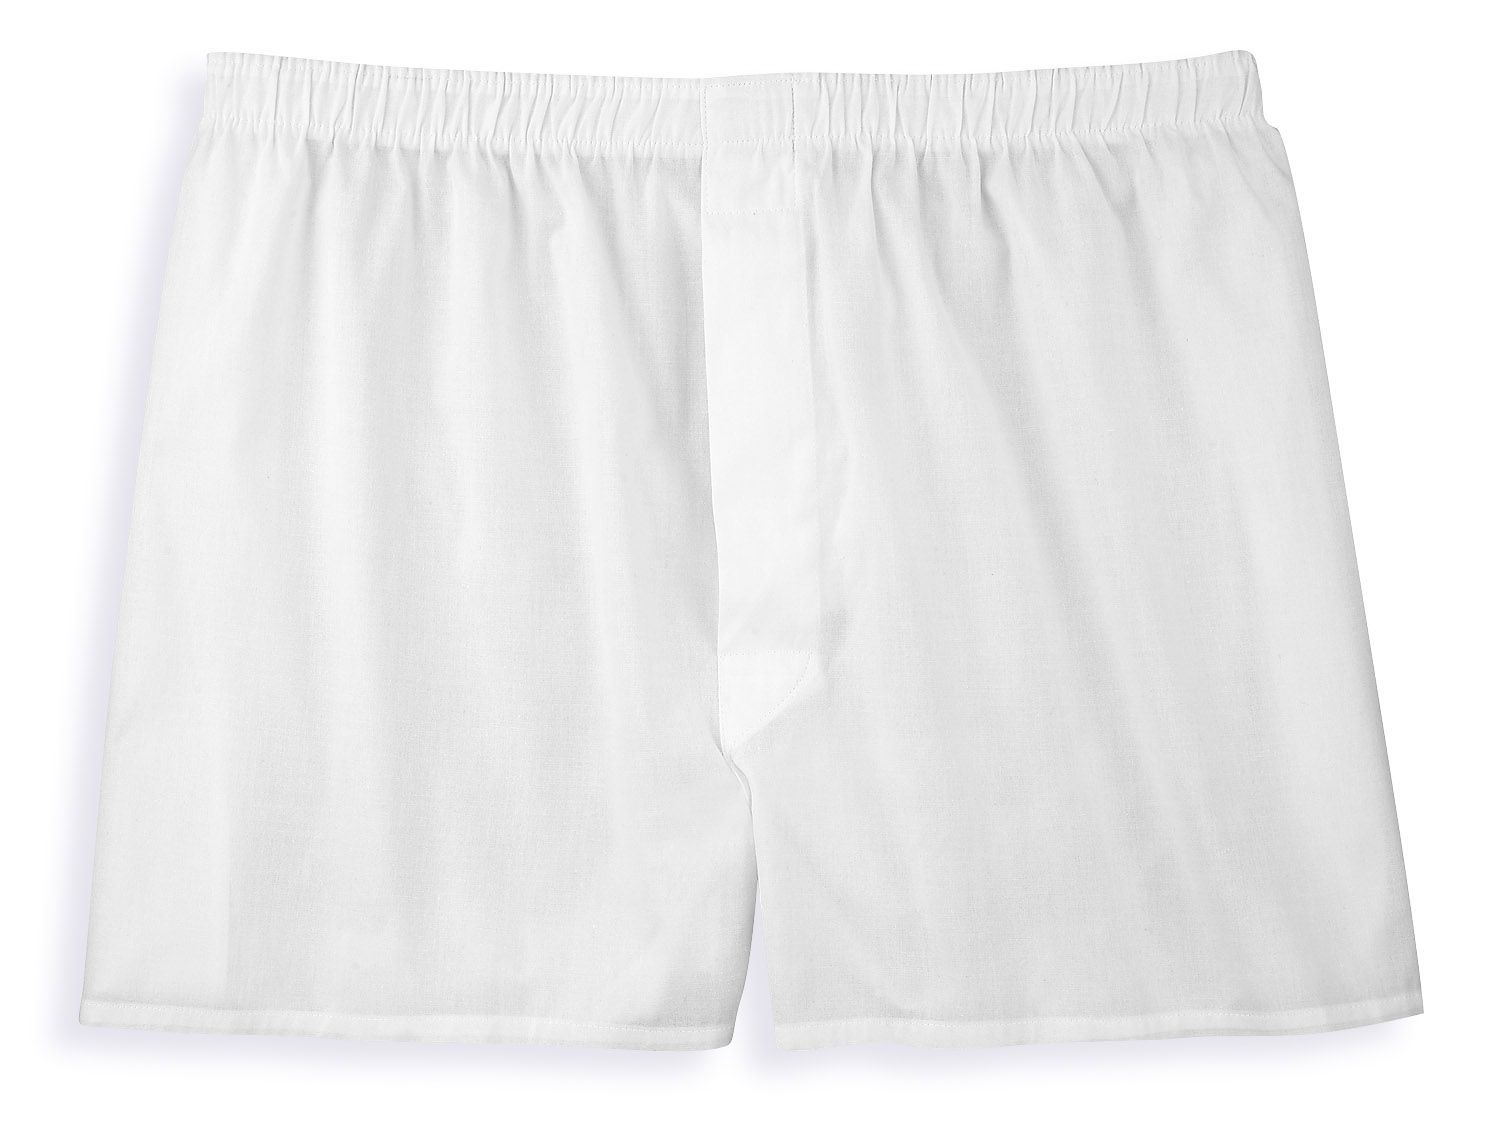 George Foreman Sport White Woven Boxers 7X,8X